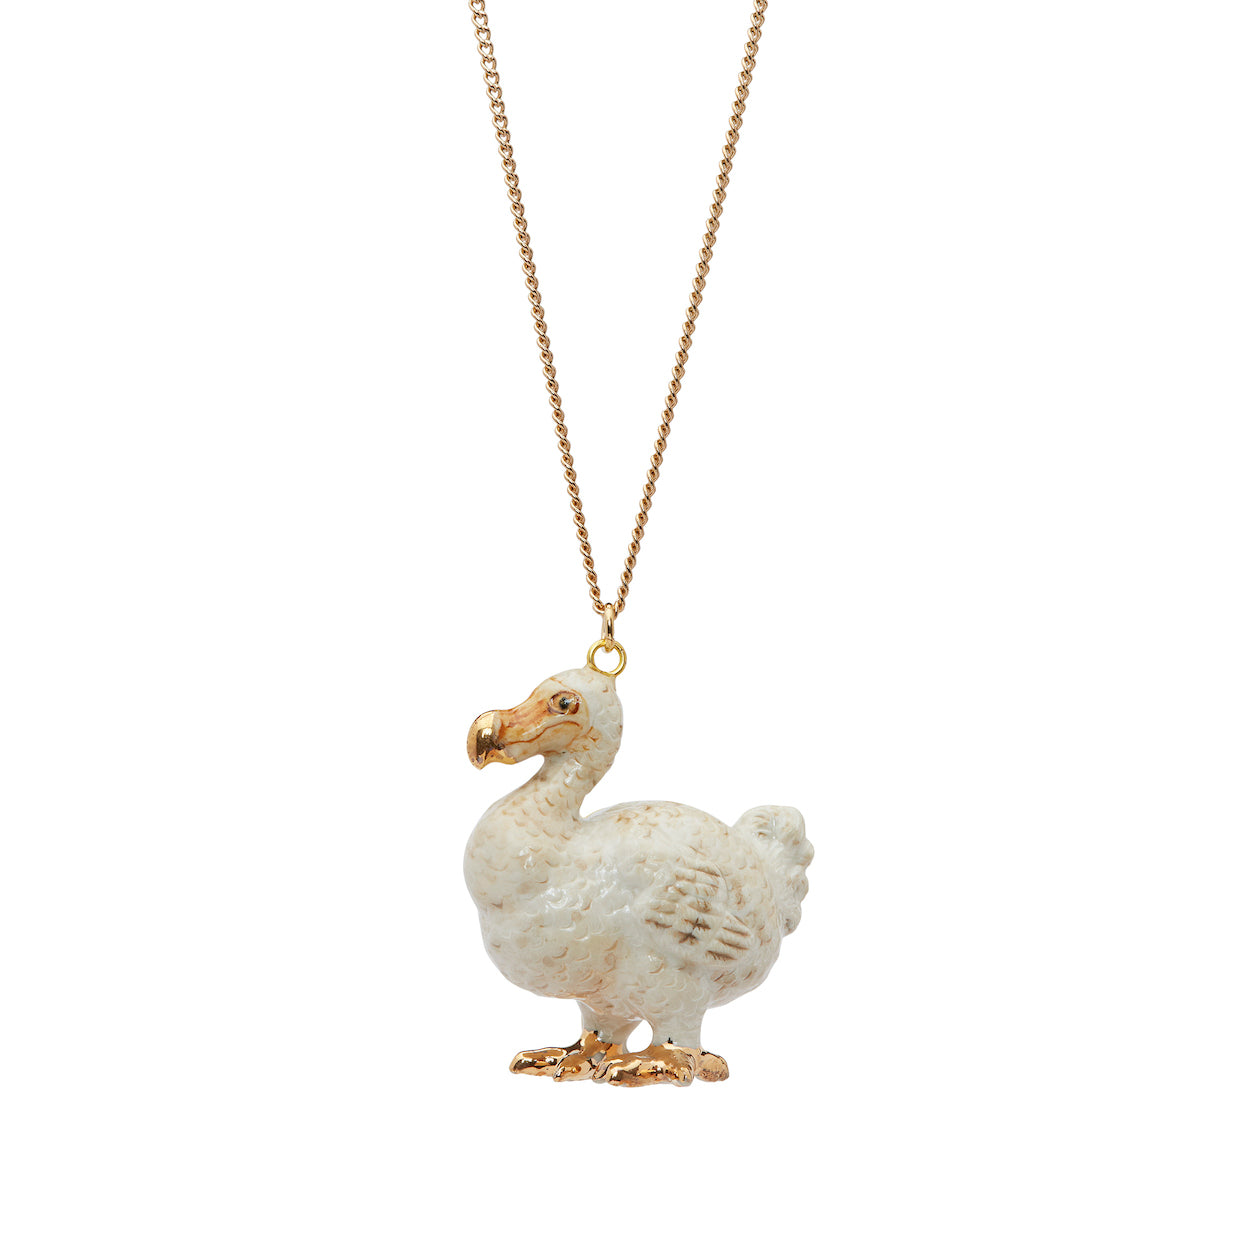 Small White and Gold Dodo Necklace